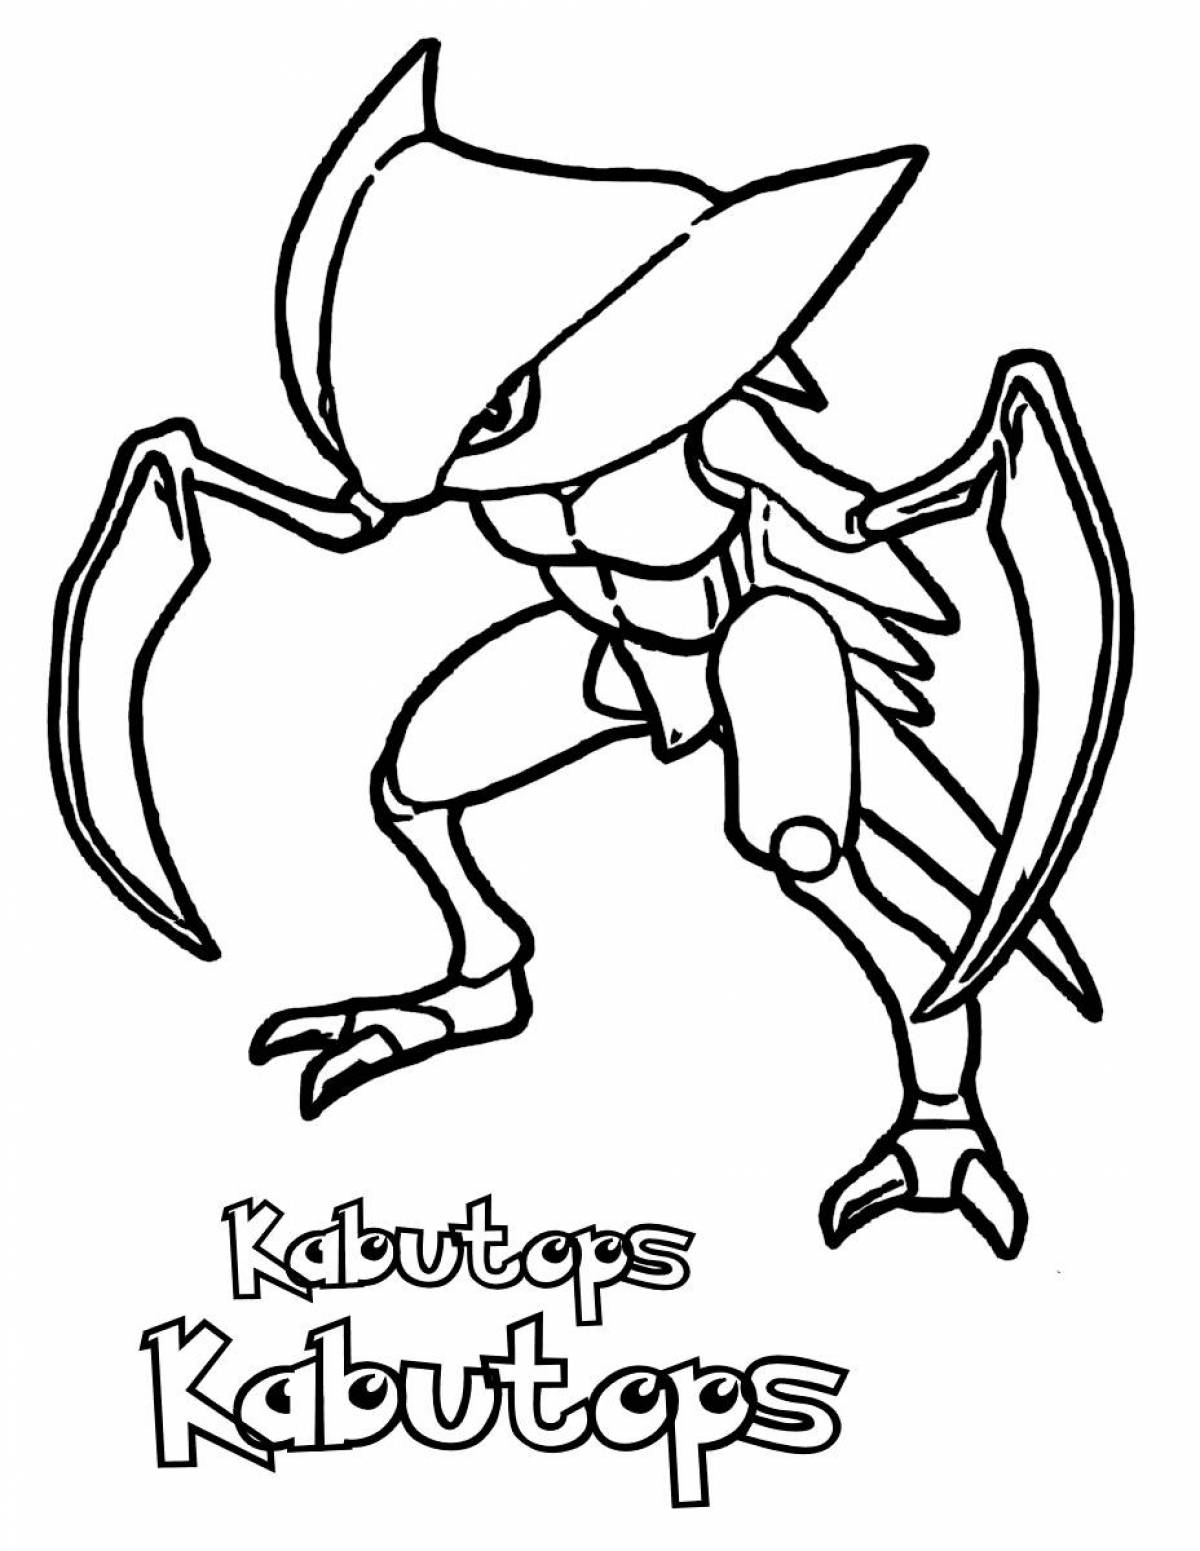 Pokemon Cabutops Coloring Pages